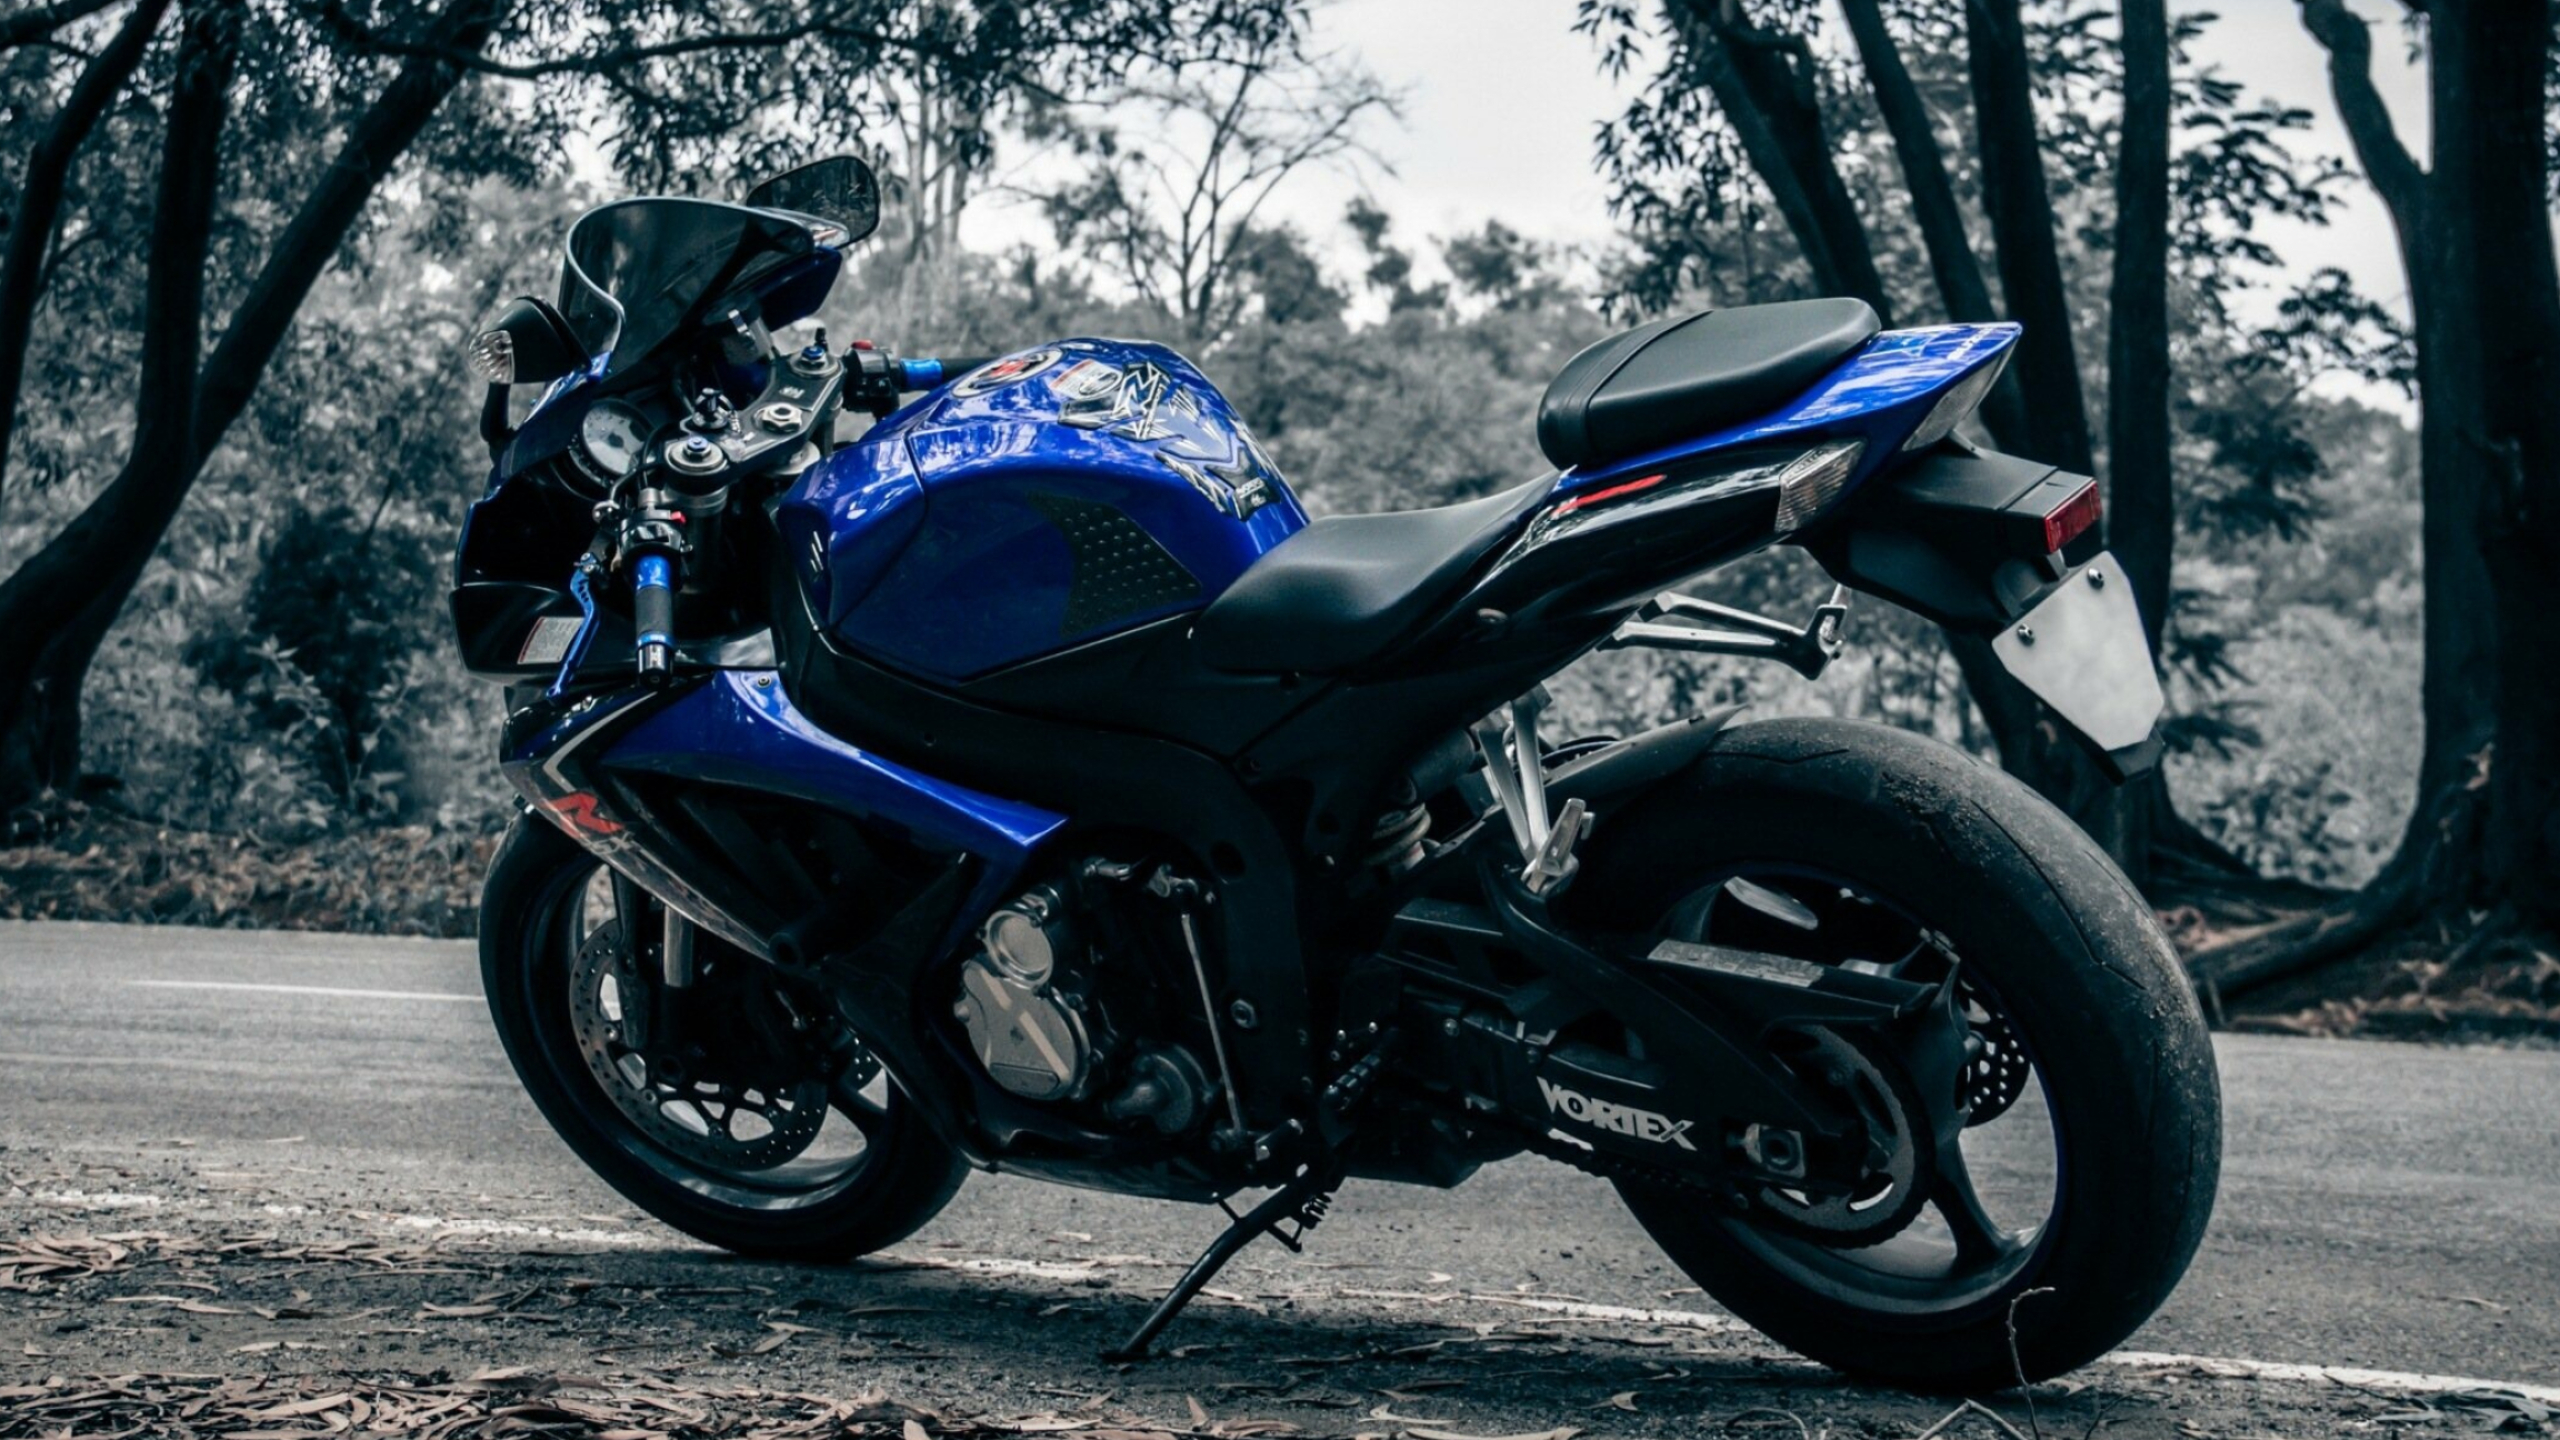 GSX-R: Suzuki released the first Gixxer on sale only in Japan in 1984. 2560x1440 HD Wallpaper.